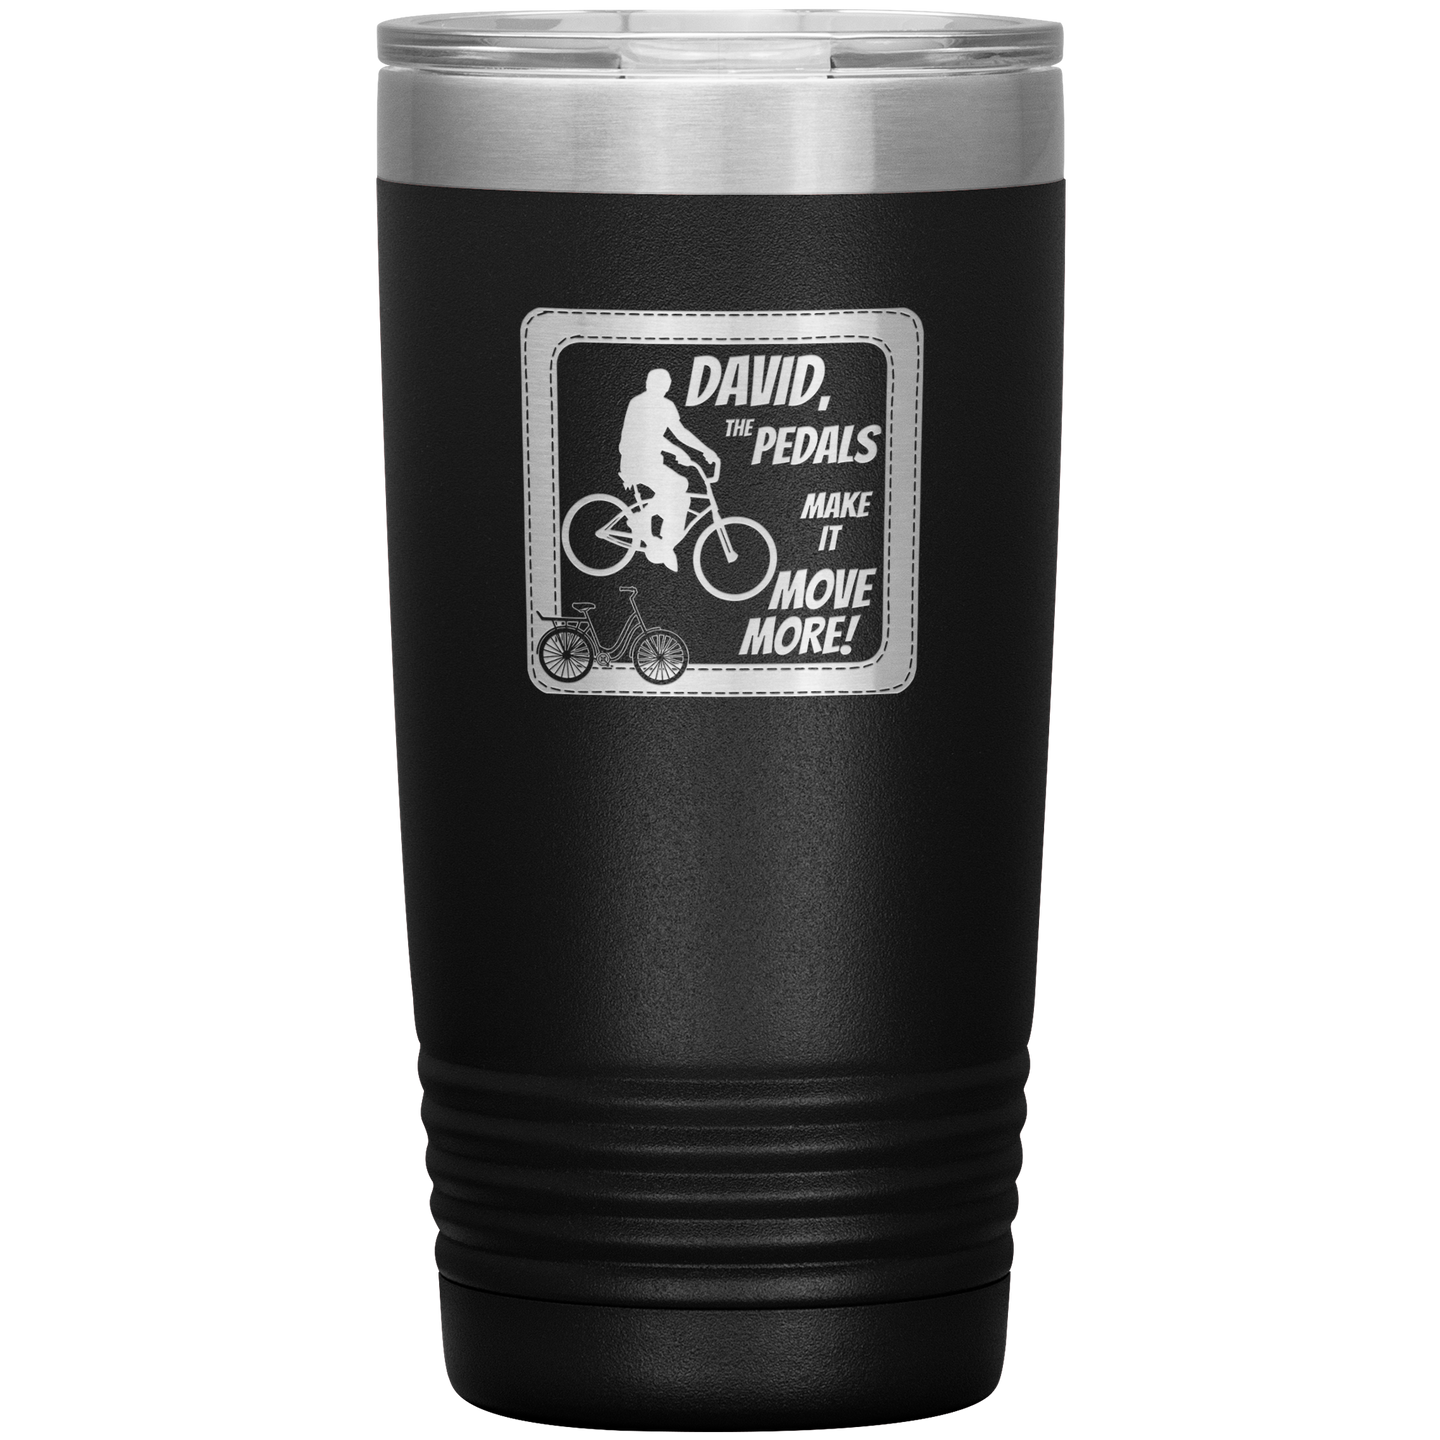 Pedals Make it Move More - Vacuum Tumbler Reusable Coffee Travel Cup 20 oz